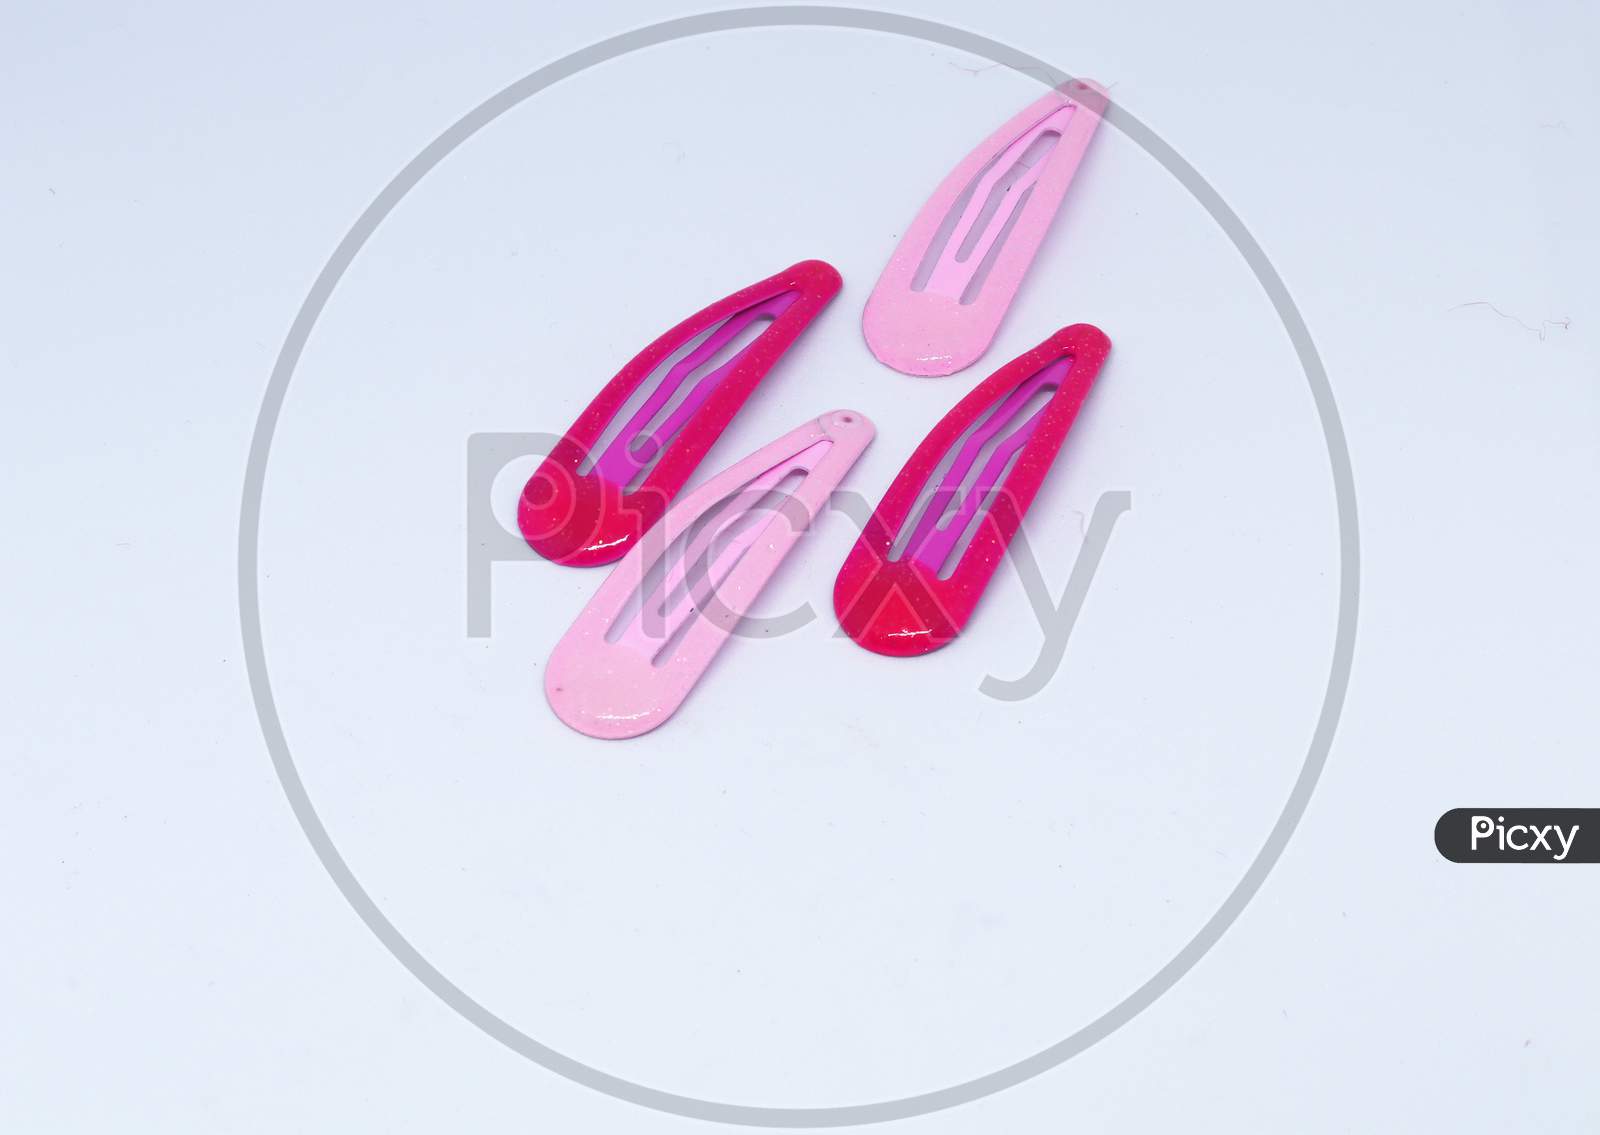 Pink and red hair claw clips isolated on white background with clipping path